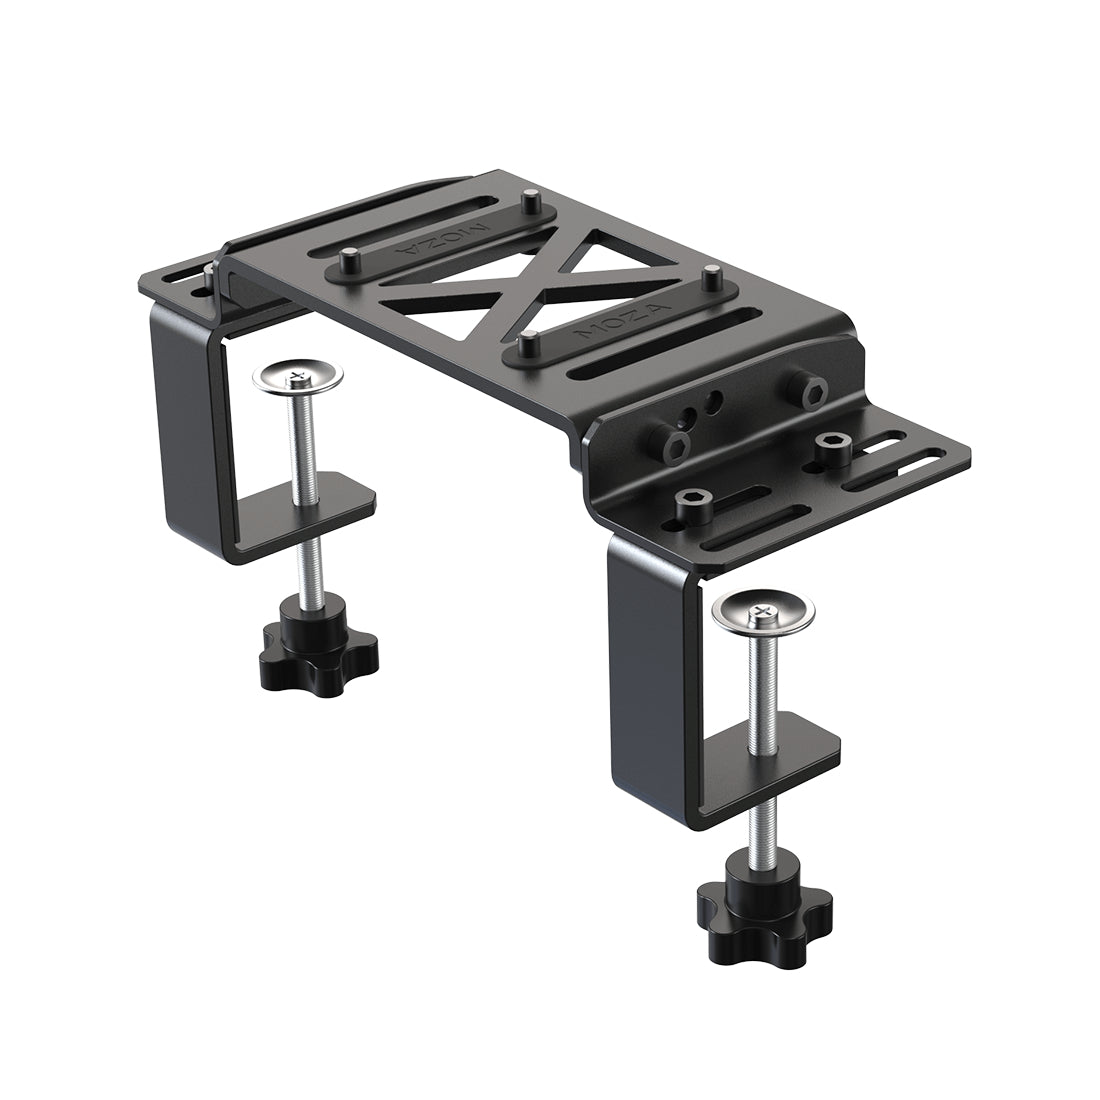 Moza Racing R9 Table Clamp - محاكي - Store 974 | ستور ٩٧٤